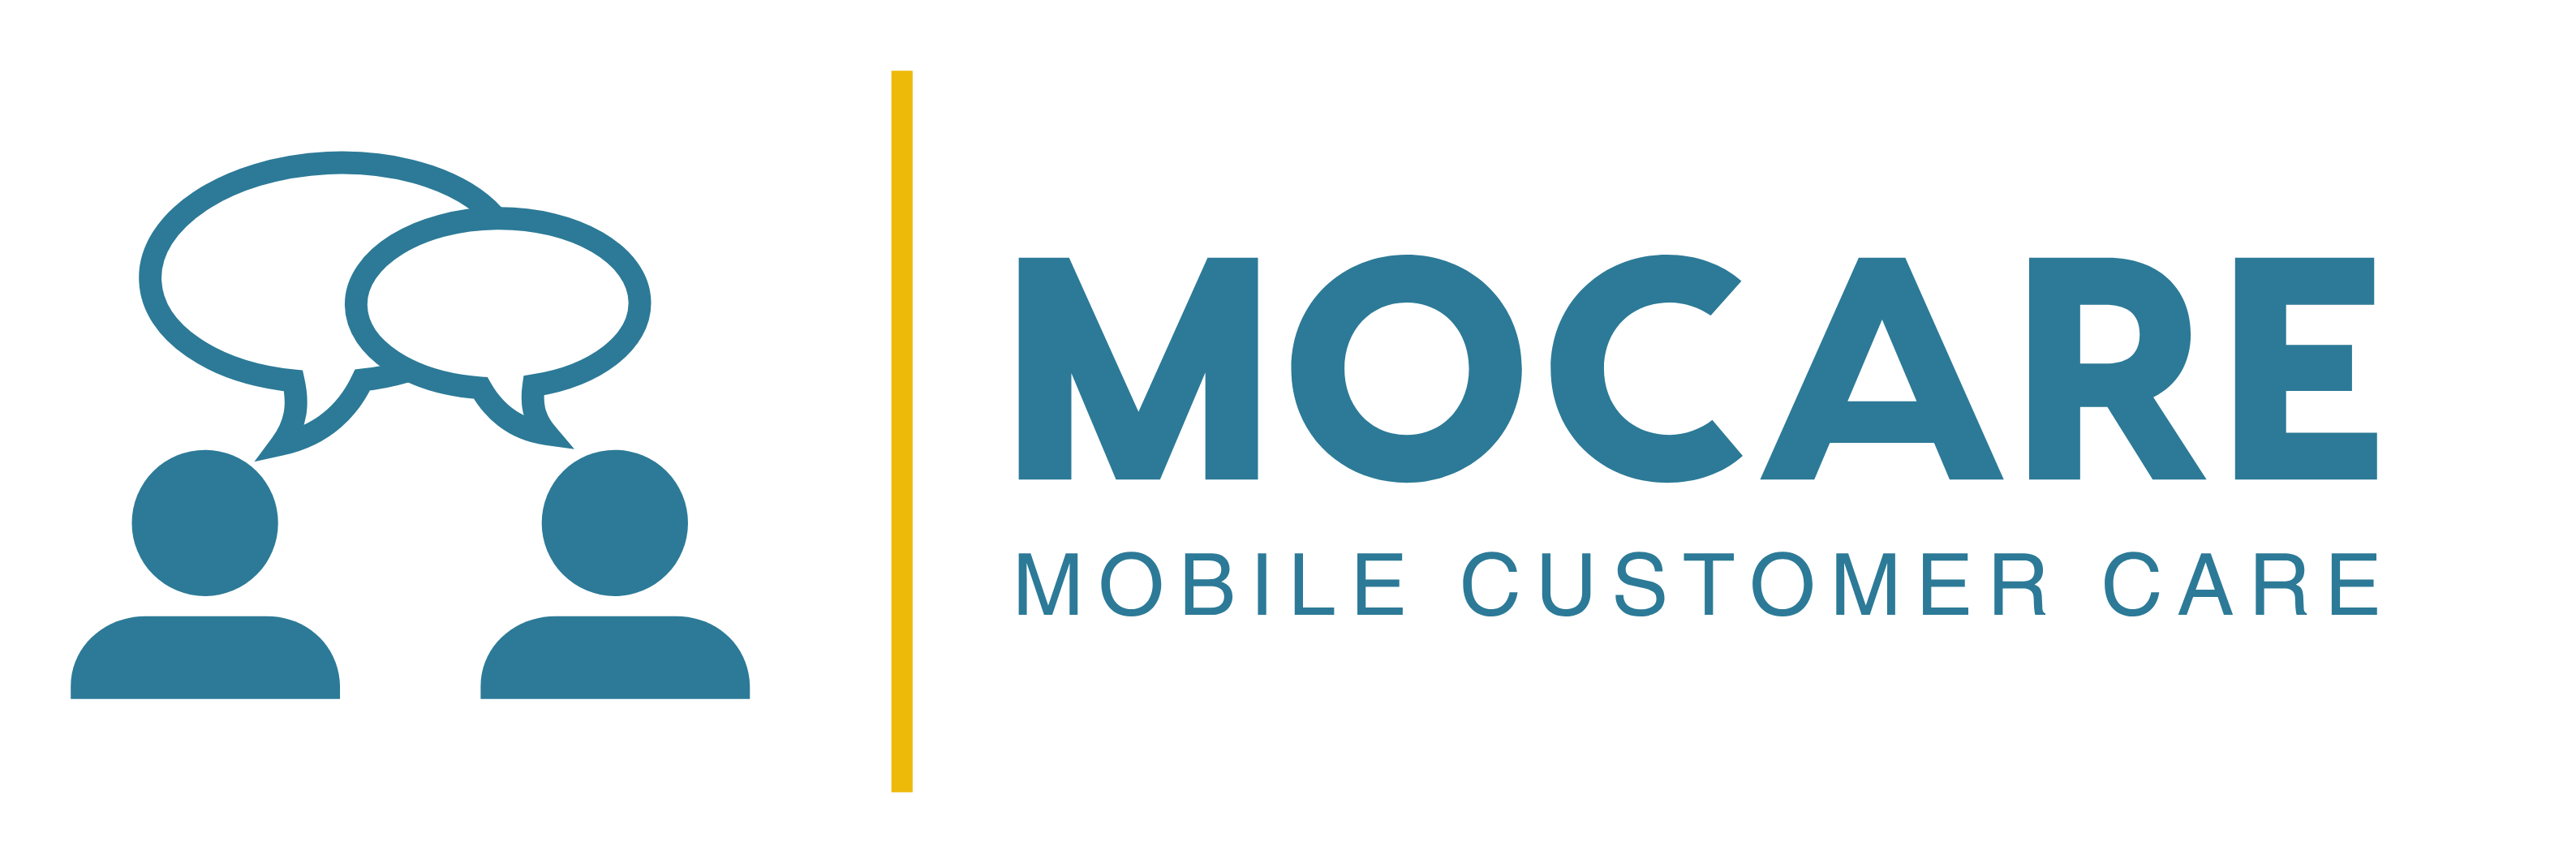 MoCCare